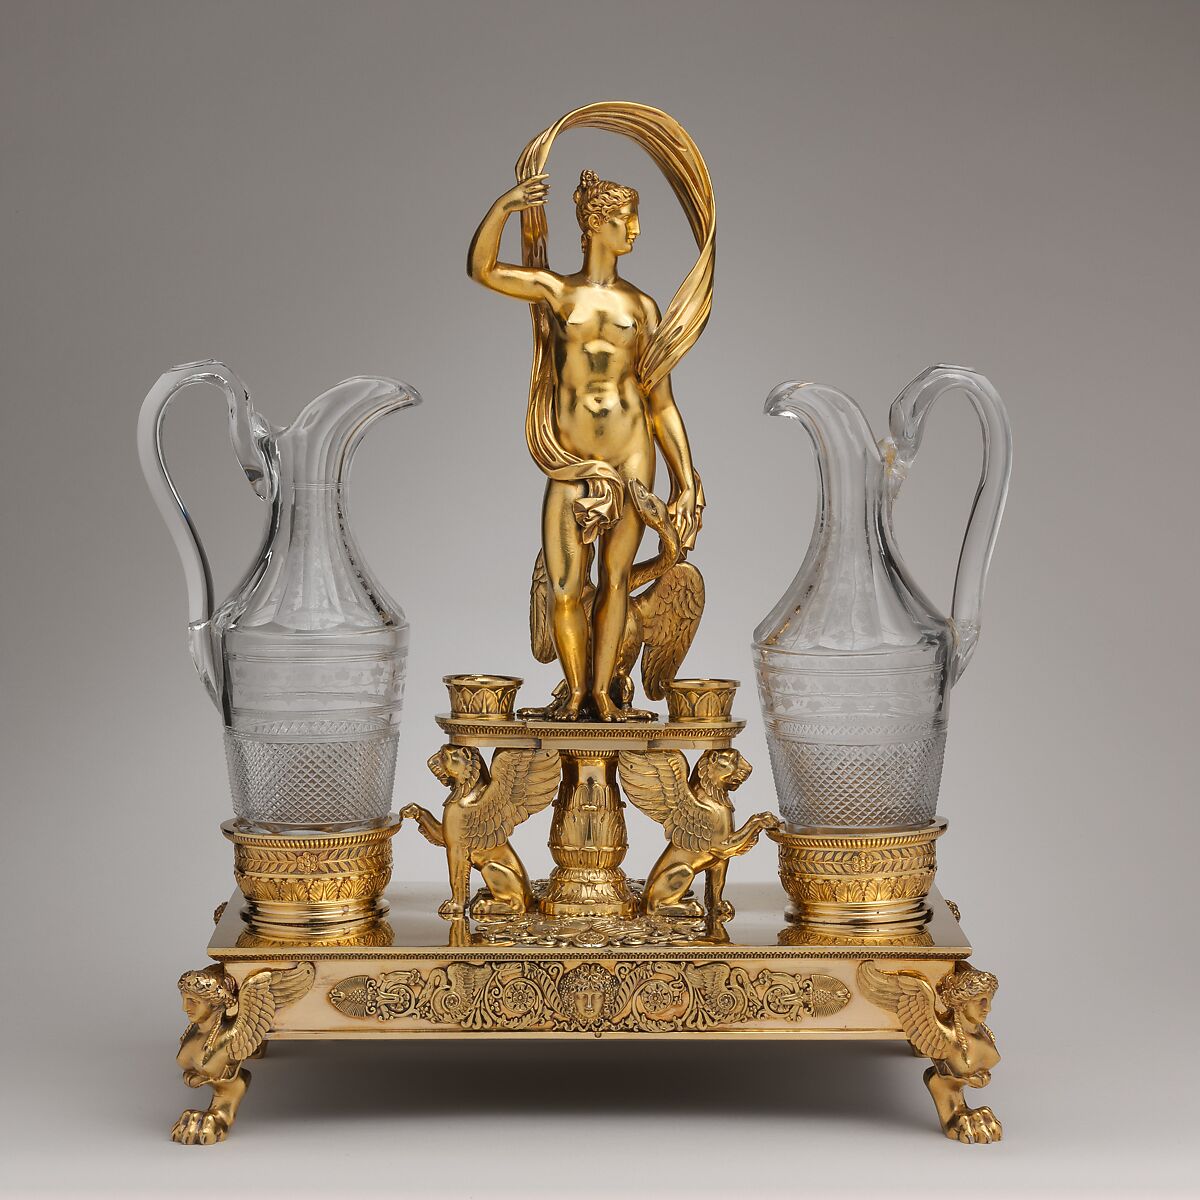 Cruet frame (one of a pair), Jean-Baptiste-Claude Odiot (French, 1763–1850), Silver gilt, glass, French, Paris 